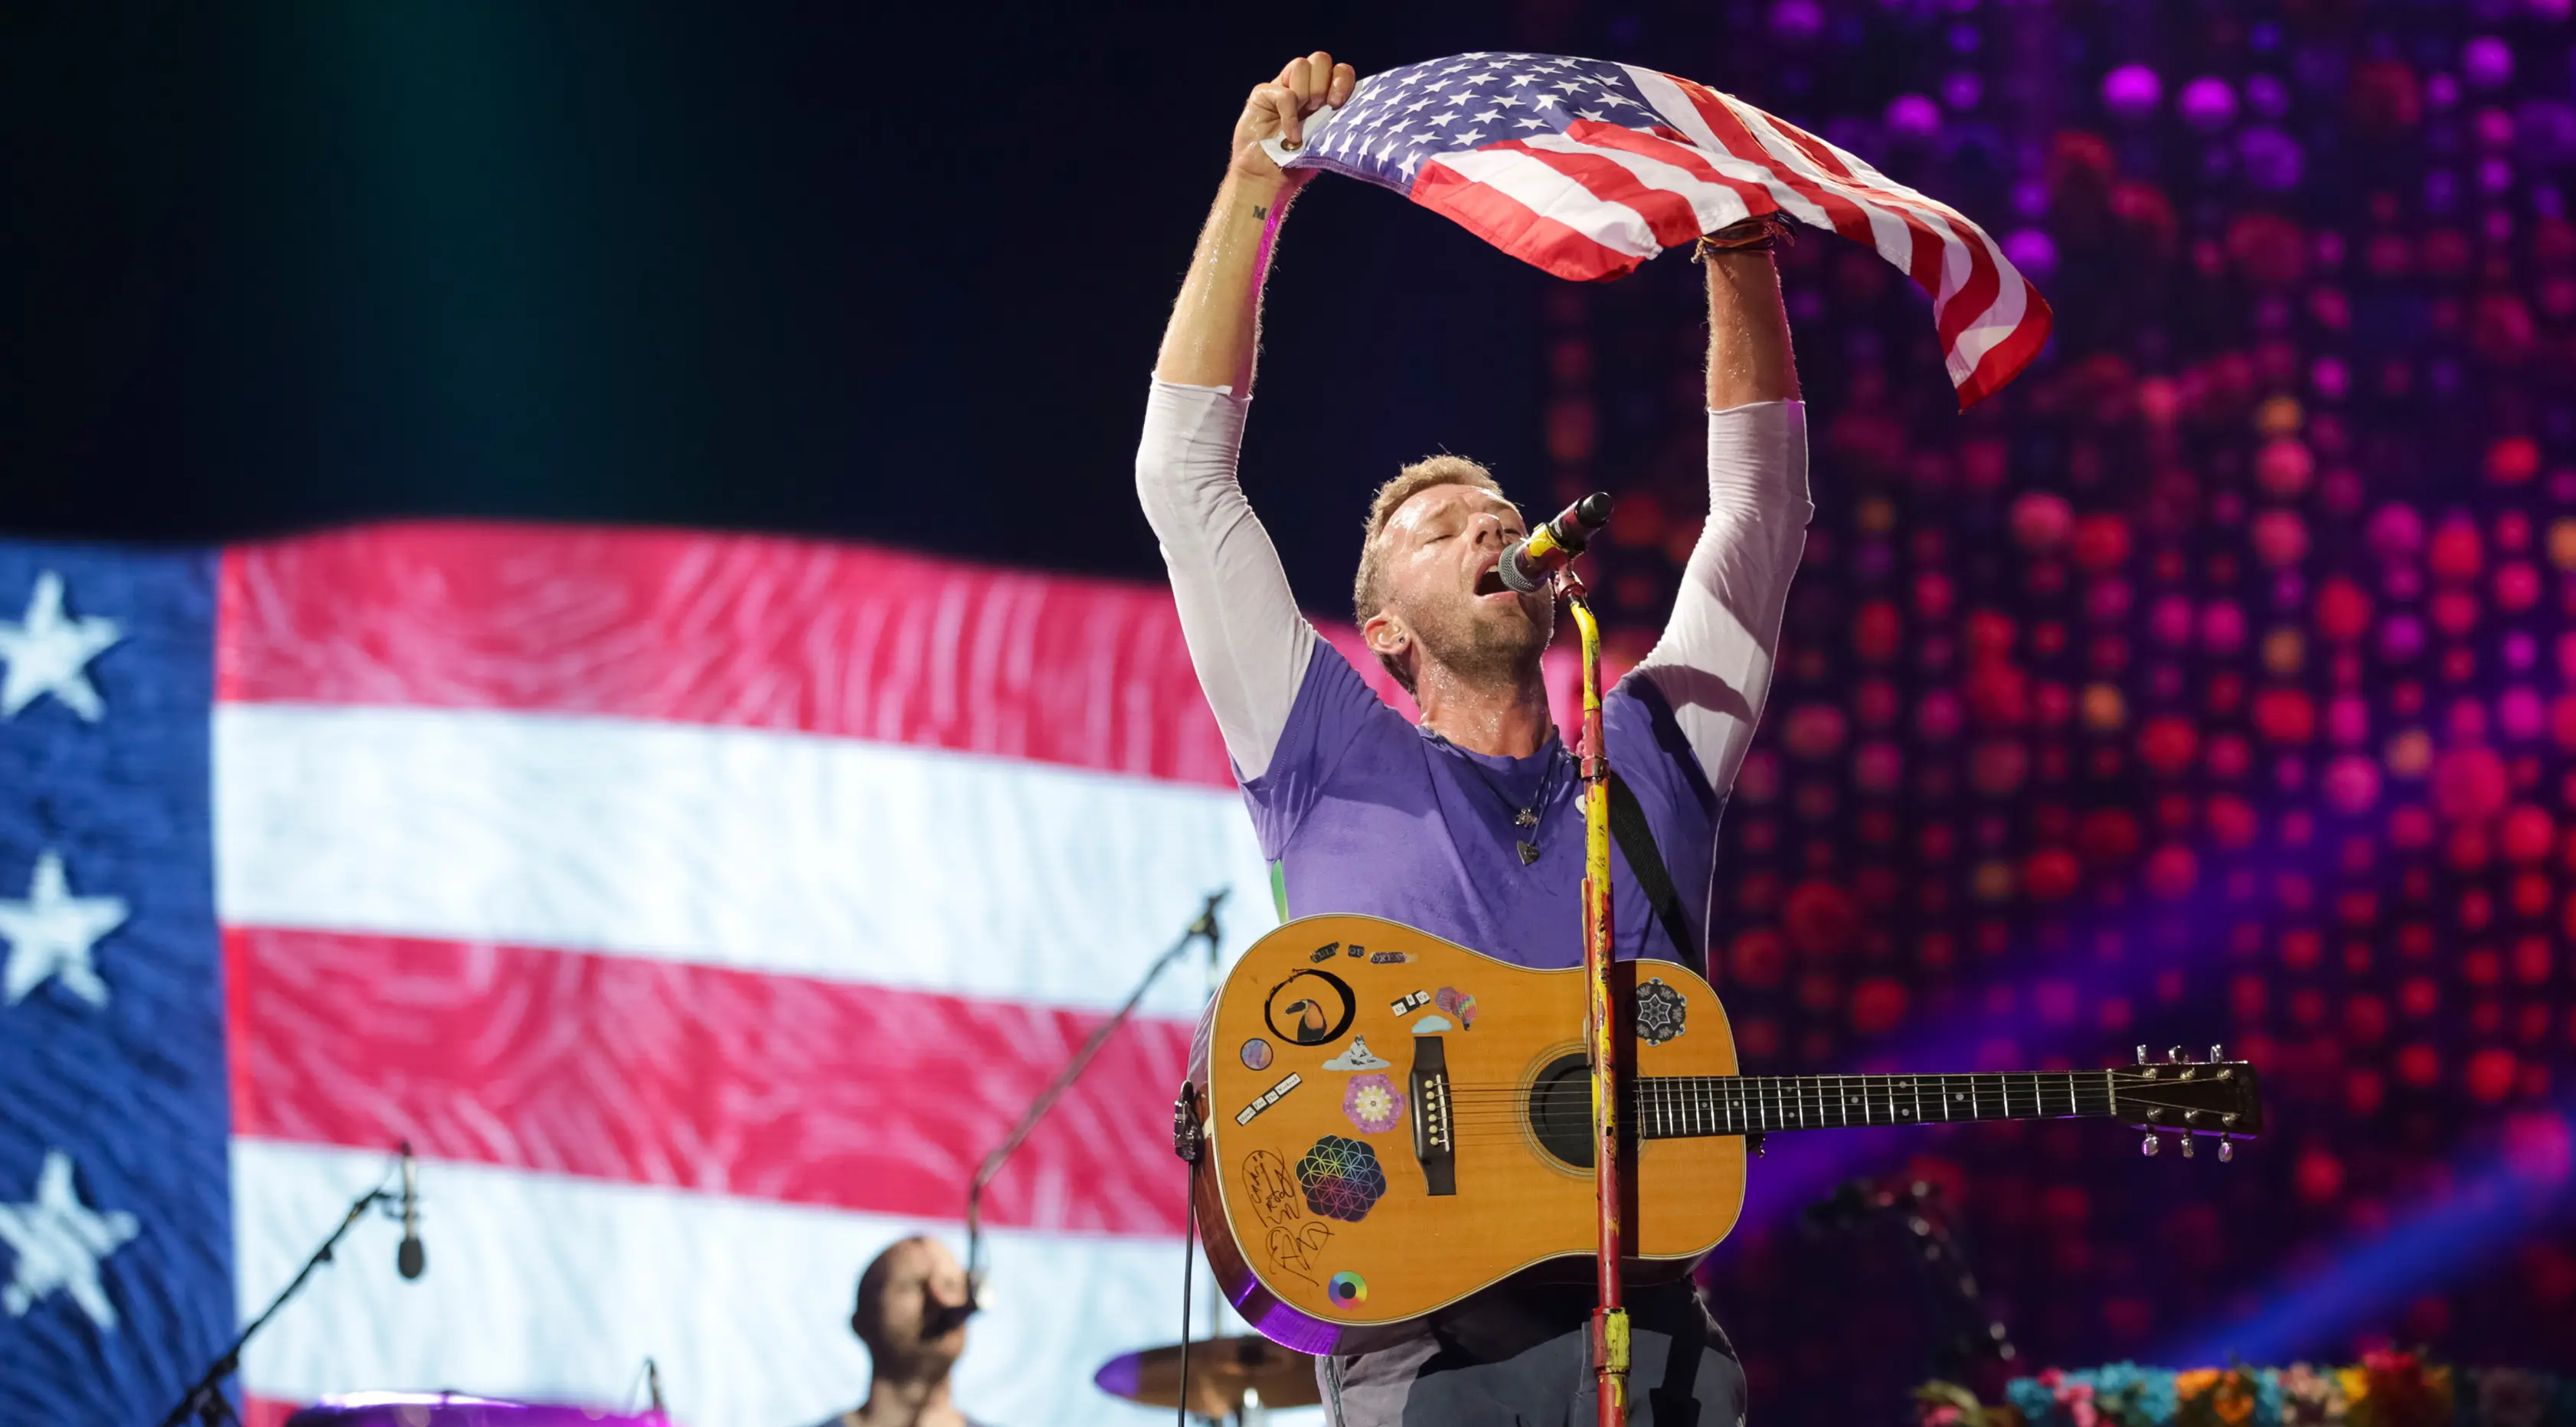 Chris Martin Coldplay (Photo by Brent N. Clarke/Invision/AP)